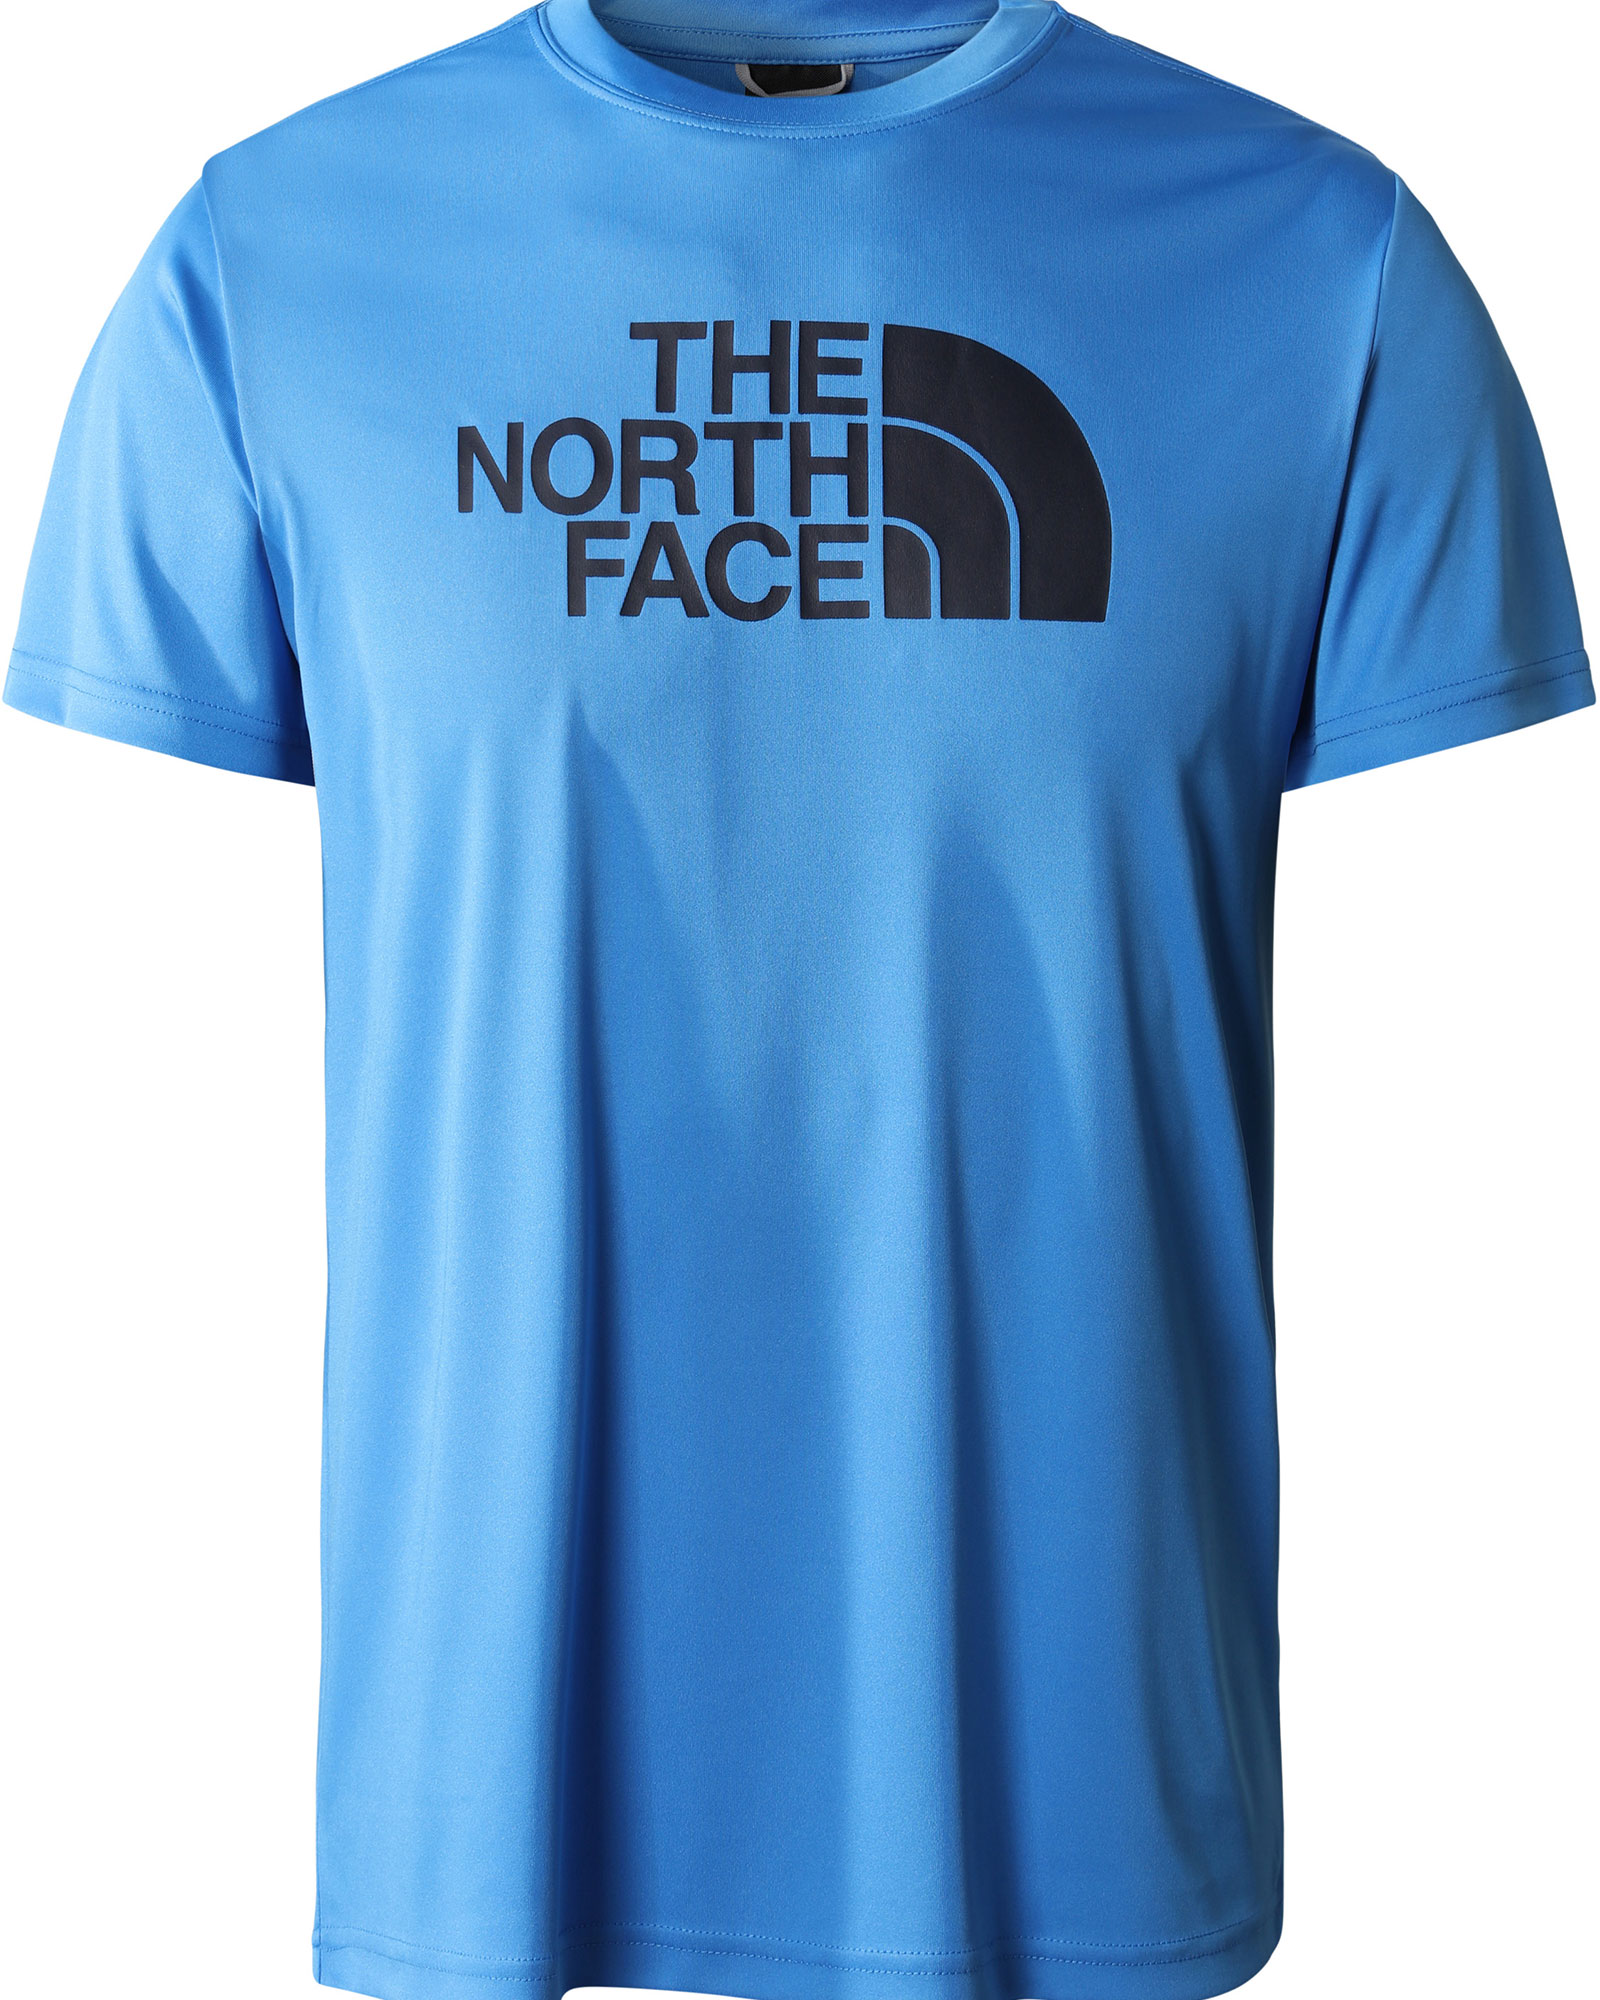 The North Face Reaxion Easy Men’s T Shirt - Super Sonic Blue M